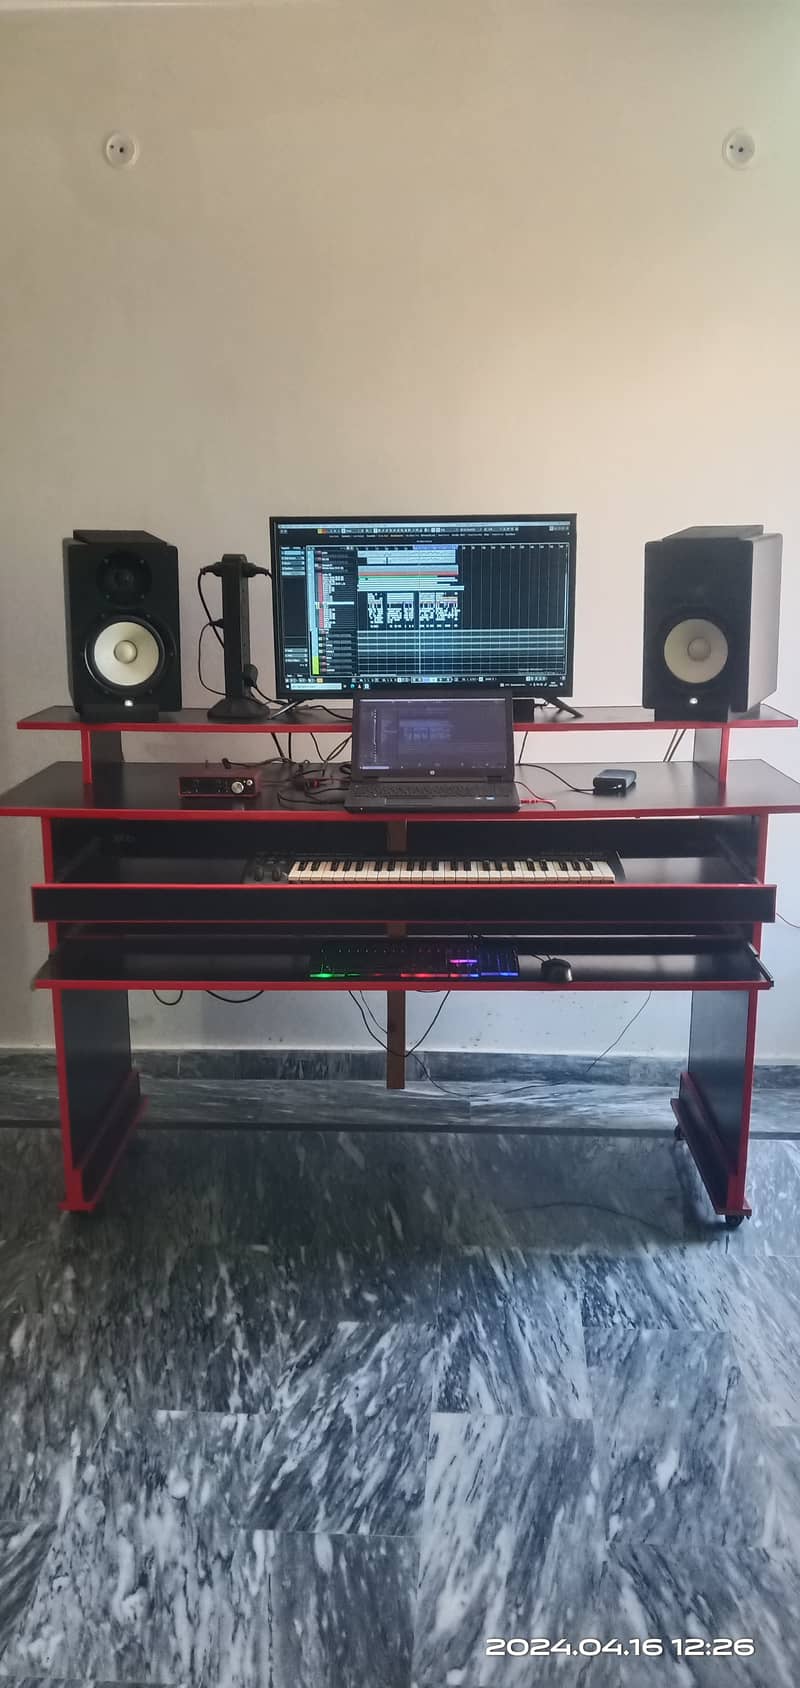 LARGE SIZED MUSIC STUDIO TABLE WORKSTATION WITH WHEELS, MICROPHONE 4